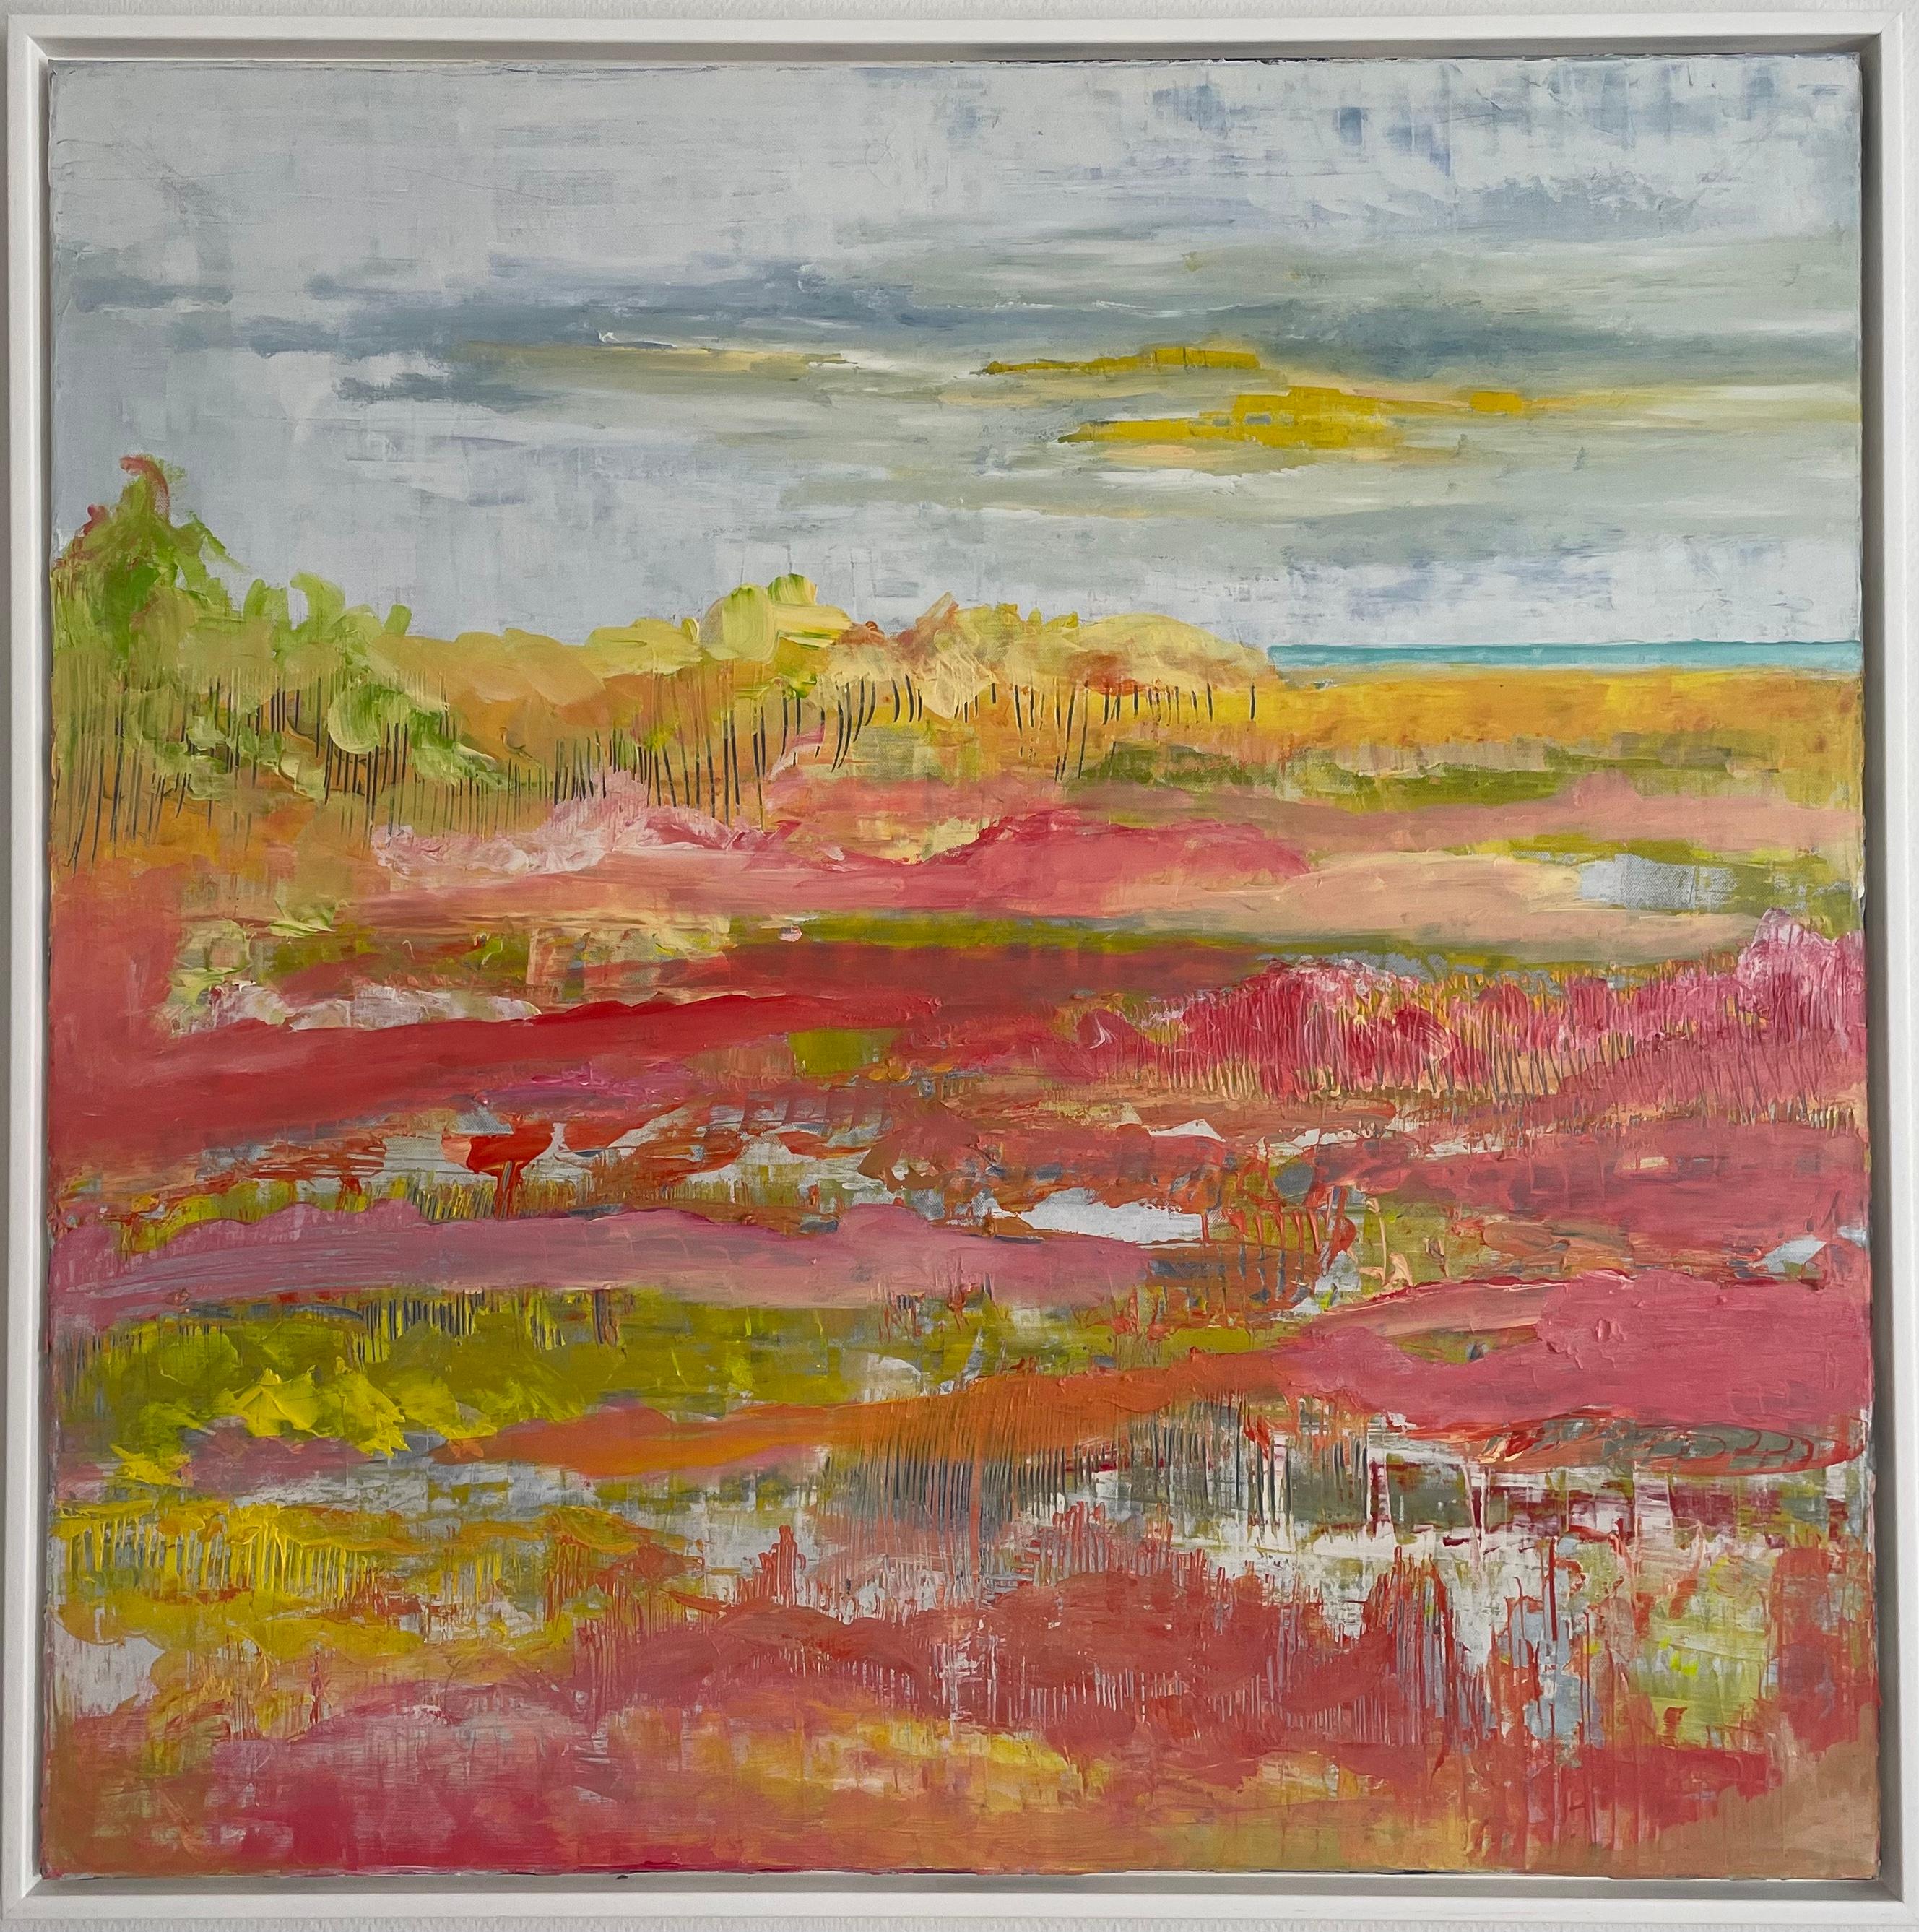 Susanne Kurdahl Vesterheden Abstract Painting - "Coral Landscape 2" A Pink And Yellow Contemporary Landscape By Susanne Kurdahl